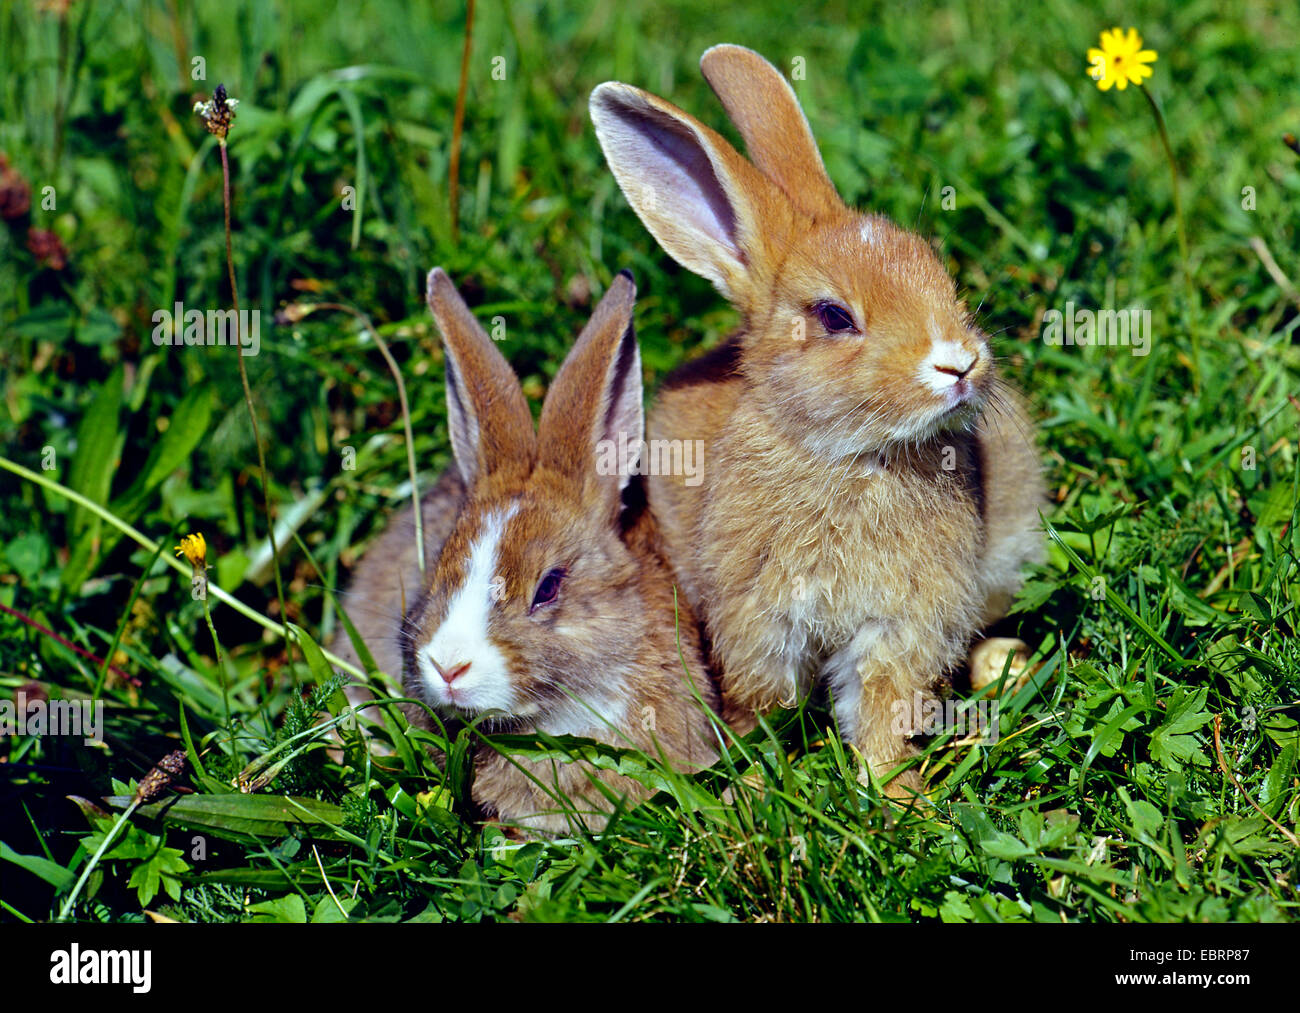 dwarf rabbit (Oryctolagus cuniculus f. domestica), two dwarf rabbits in a meadow, Germany Stock Photo